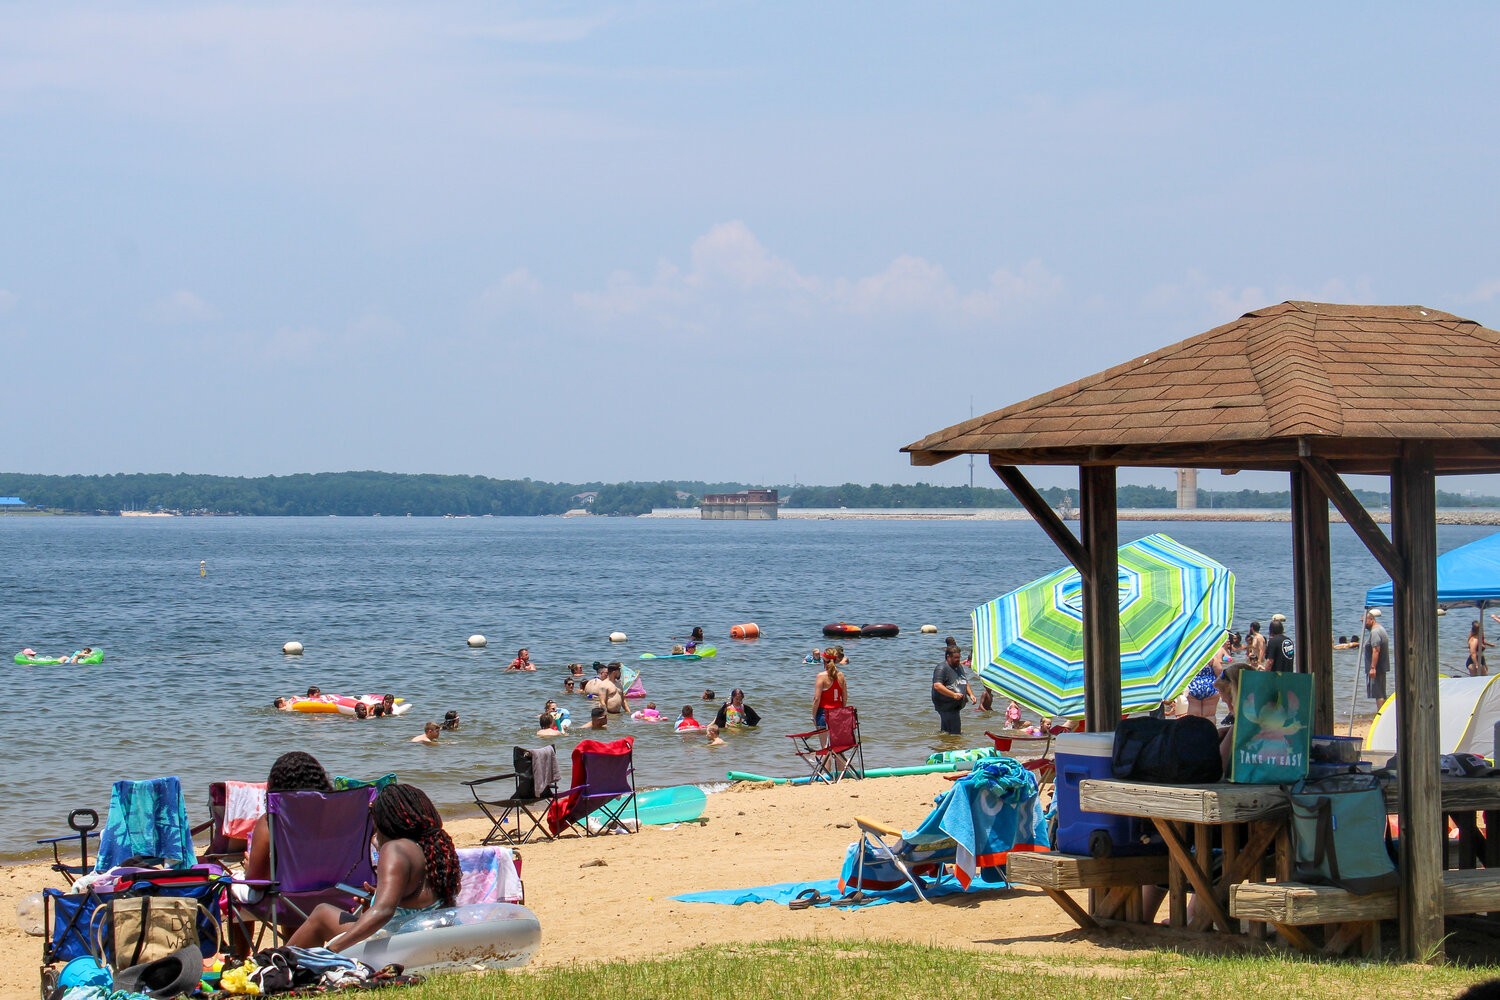 40 parking spaces at the Dominion Energy park on the Lexington side of the Lake Murray Dam, site of the company's popular public beach, will close in January as the company starts work on the dam's iconic intake towers.